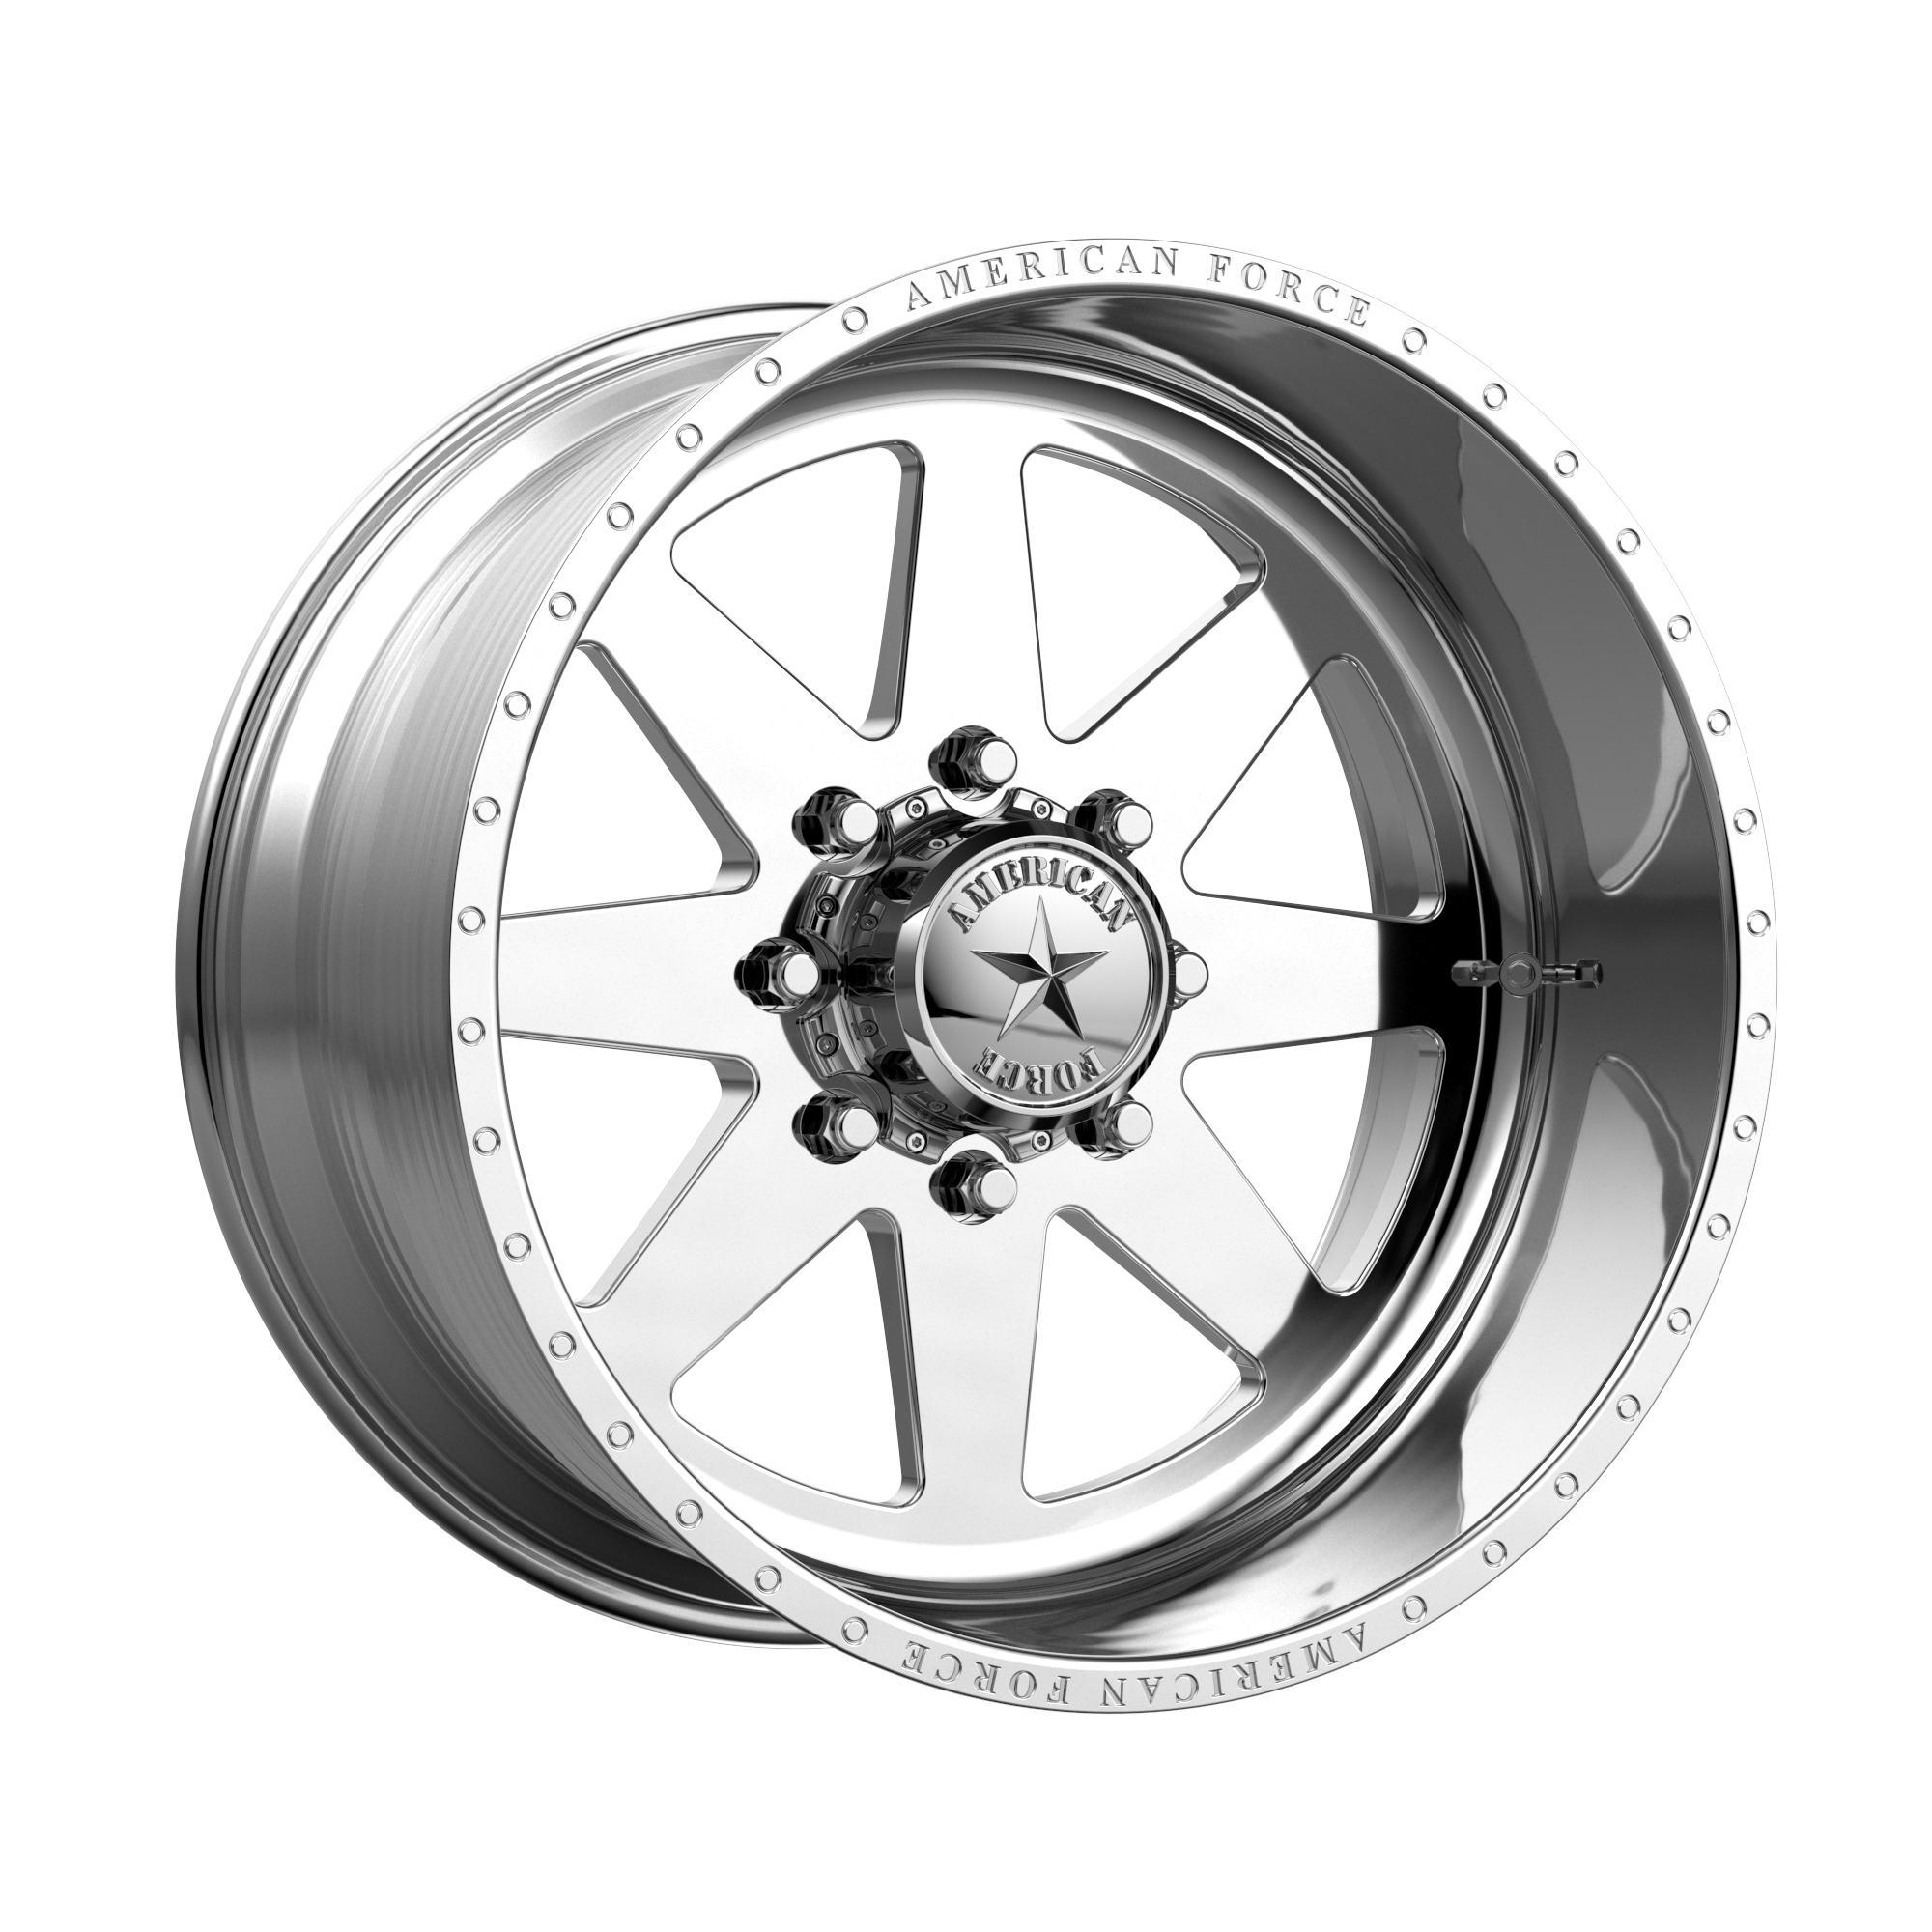 INDEPENDENCE SS 22x16 8x180.00 POLISHED (-73 mm) - Tires and Engine Performance